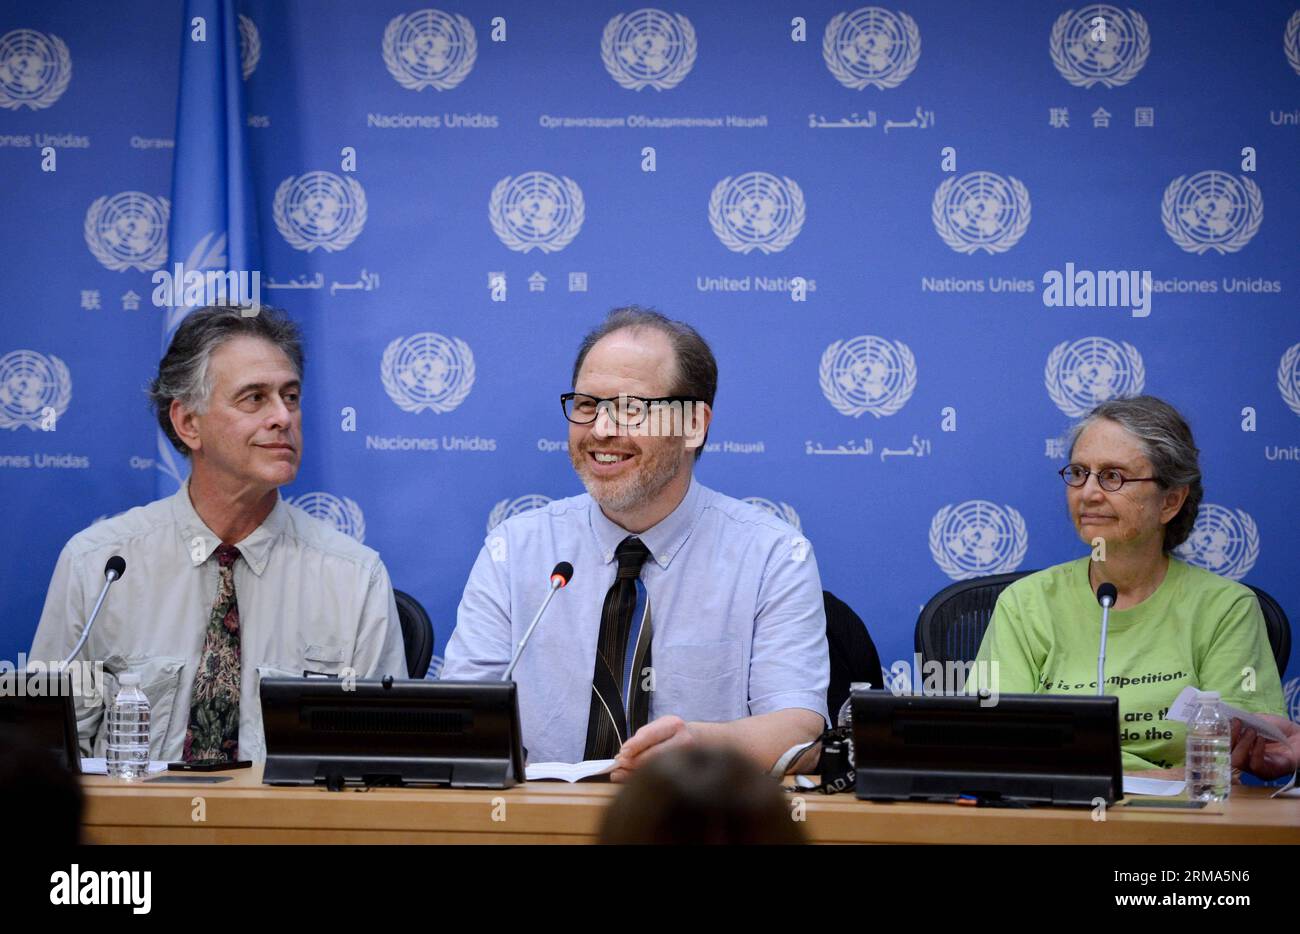 Antiwar activist Joe Losbaker (C), one of five US observers who monitored the Syrian presidential election, speaks during their joint press conference with Syrian Permanent Representative to the United Nations Bashar Ja afari (not in picture) at the UN headquarters in New York, on June 18, 2014. (Xinhua/Niu Xiaolei) UN-NEW YORK-SYRIA-ELECTION-OBSERVERS PUBLICATIONxNOTxINxCHN   Activist Joe  C One of Five U.S. OBSERVERS Who Monitored The Syrian Presidential ELECTION Speaks during their Joint Press Conference With Syrian permanently Representative to The United Nations Bashar Yes Afari Not in Pi Stock Photo